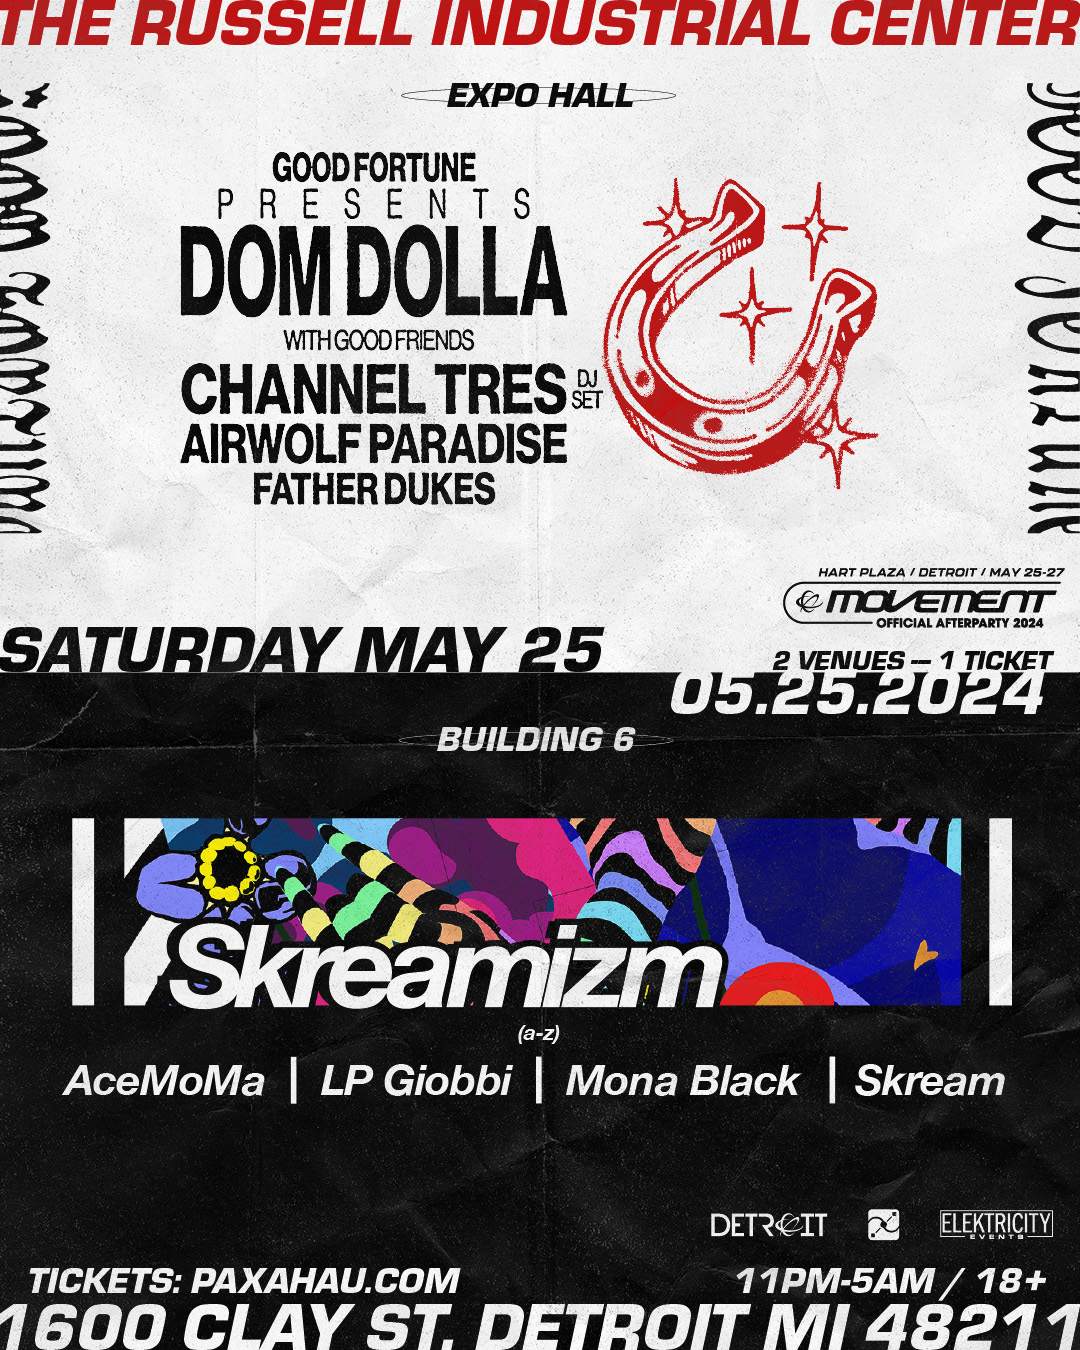 Good Fortune presents Dom Dolla & Skreamizm - Official Movement Afterparty - Página frontal